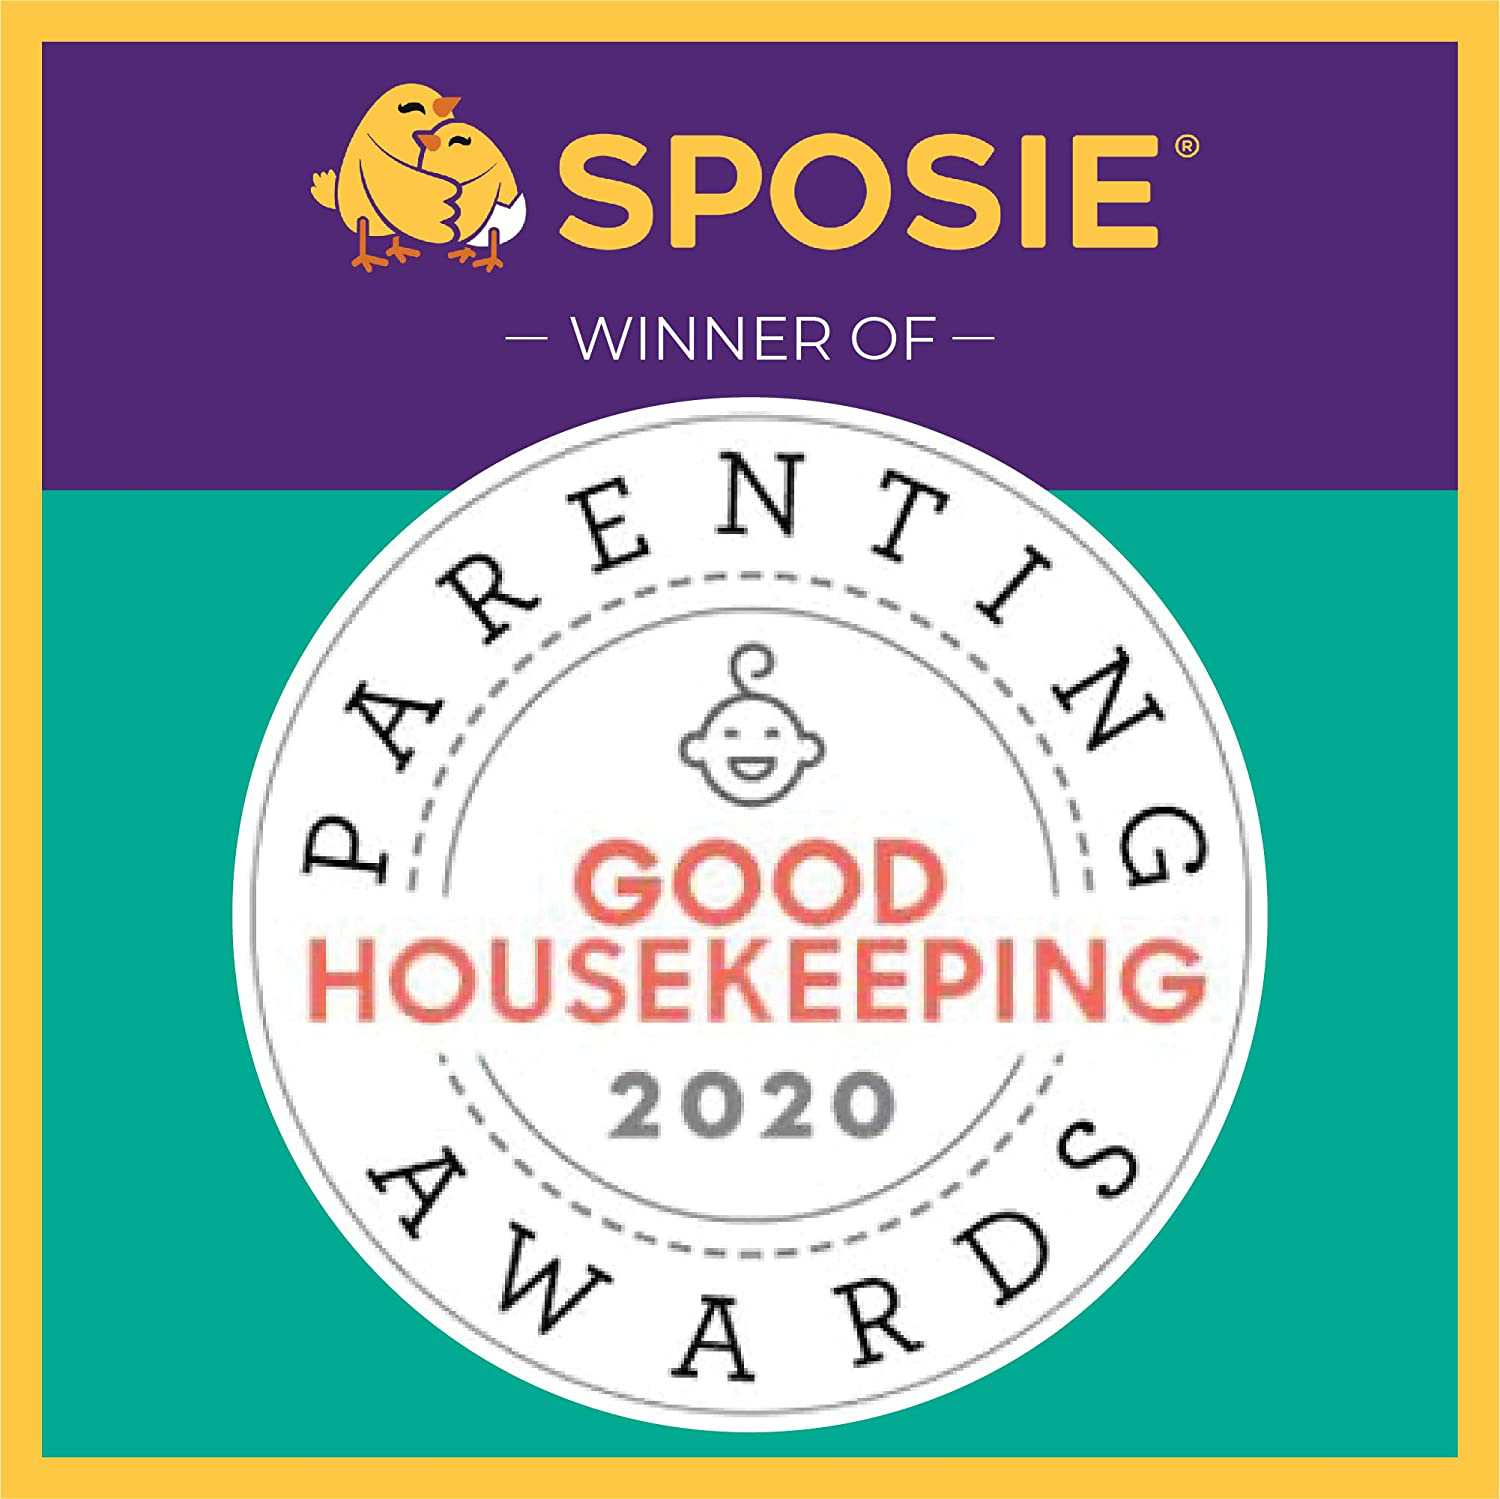 Sposie with Adhesive, Stop Overnight Diaper Leaks, Nighttime Protection for Heavy Wetters, Potty Training, and Active Sleepers, Fits Diaper Sizes 4-6 and Pull-Ons 2T-5T, 84 Ct for Boys and Girls Animals & Pet Supplies > Pet Supplies > Dog Supplies > Dog Diaper Pads & Liners Select Kids   